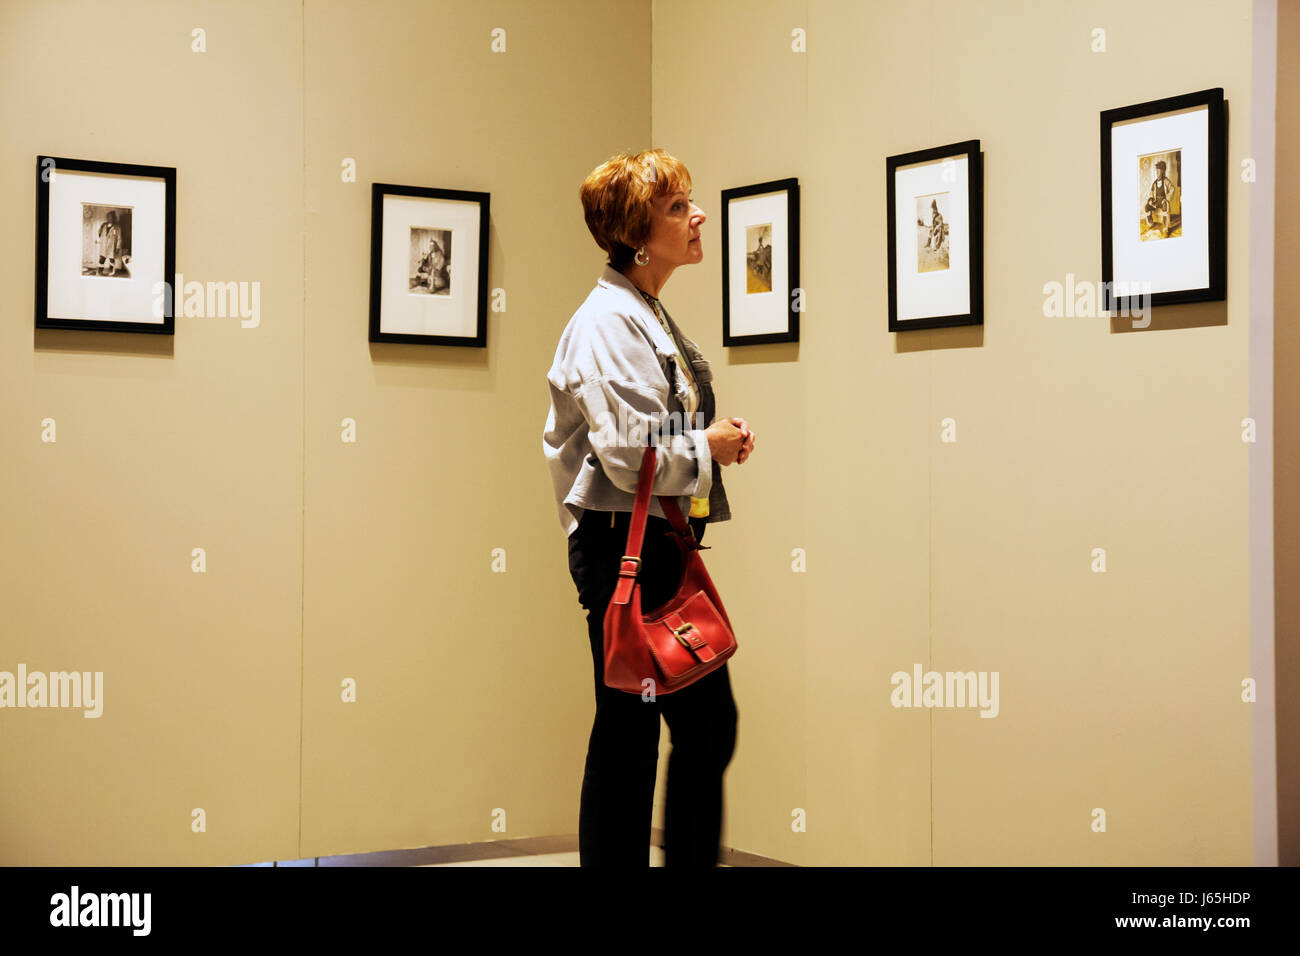 Michigan Saginaw,Saginaw Art Museum,education,exhibit exhibition collectionwoman female women,middle aged,red hair,looking,framed prints,profile,galle Stock Photo